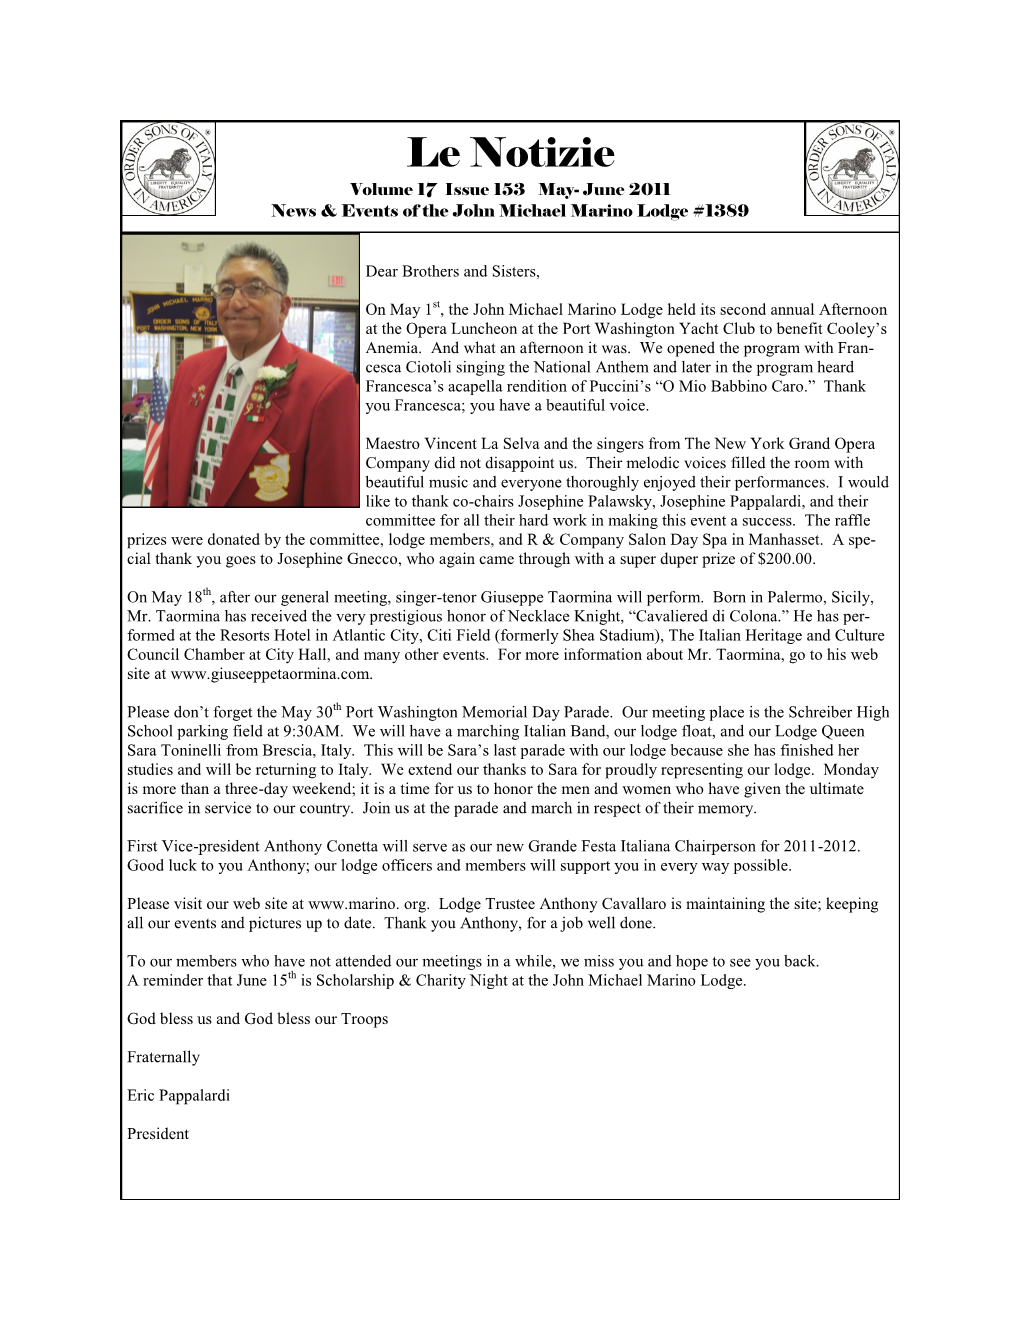 Le Notizie Volume 17 Issue 153 May- June 2011 News & Events of the John Michael Marino Lodge #1389